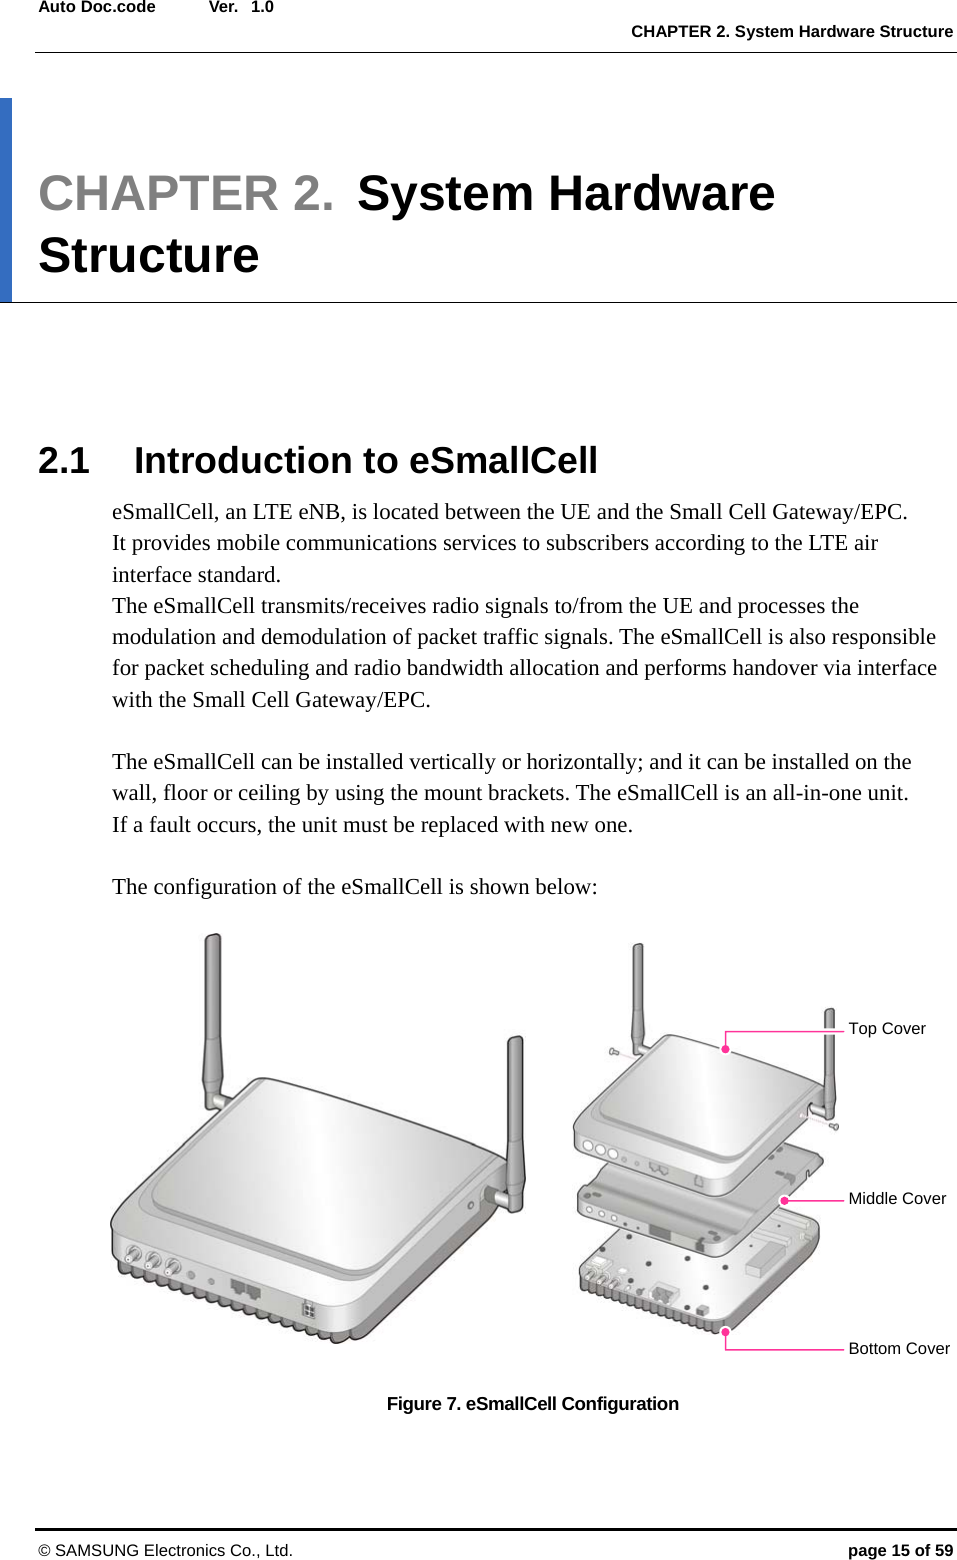  Ver.  CHAPTER 2. System Hardware Structure © SAMSUNG Electronics Co., Ltd.  page 15 of 59 Auto Doc.code  1.0 CHAPTER 2. System Hardware Structure     2.1 Introduction to eSmallCell eSmallCell, an LTE eNB, is located between the UE and the Small Cell Gateway/EPC.   It provides mobile communications services to subscribers according to the LTE air interface standard.   The eSmallCell transmits/receives radio signals to/from the UE and processes the modulation and demodulation of packet traffic signals. The eSmallCell is also responsible for packet scheduling and radio bandwidth allocation and performs handover via interface with the Small Cell Gateway/EPC.  The eSmallCell can be installed vertically or horizontally; and it can be installed on the wall, floor or ceiling by using the mount brackets. The eSmallCell is an all-in-one unit.   If a fault occurs, the unit must be replaced with new one.  The configuration of the eSmallCell is shown below:  Figure 7. eSmallCell Configuration Top Cover Middle CoverBottom Cover 